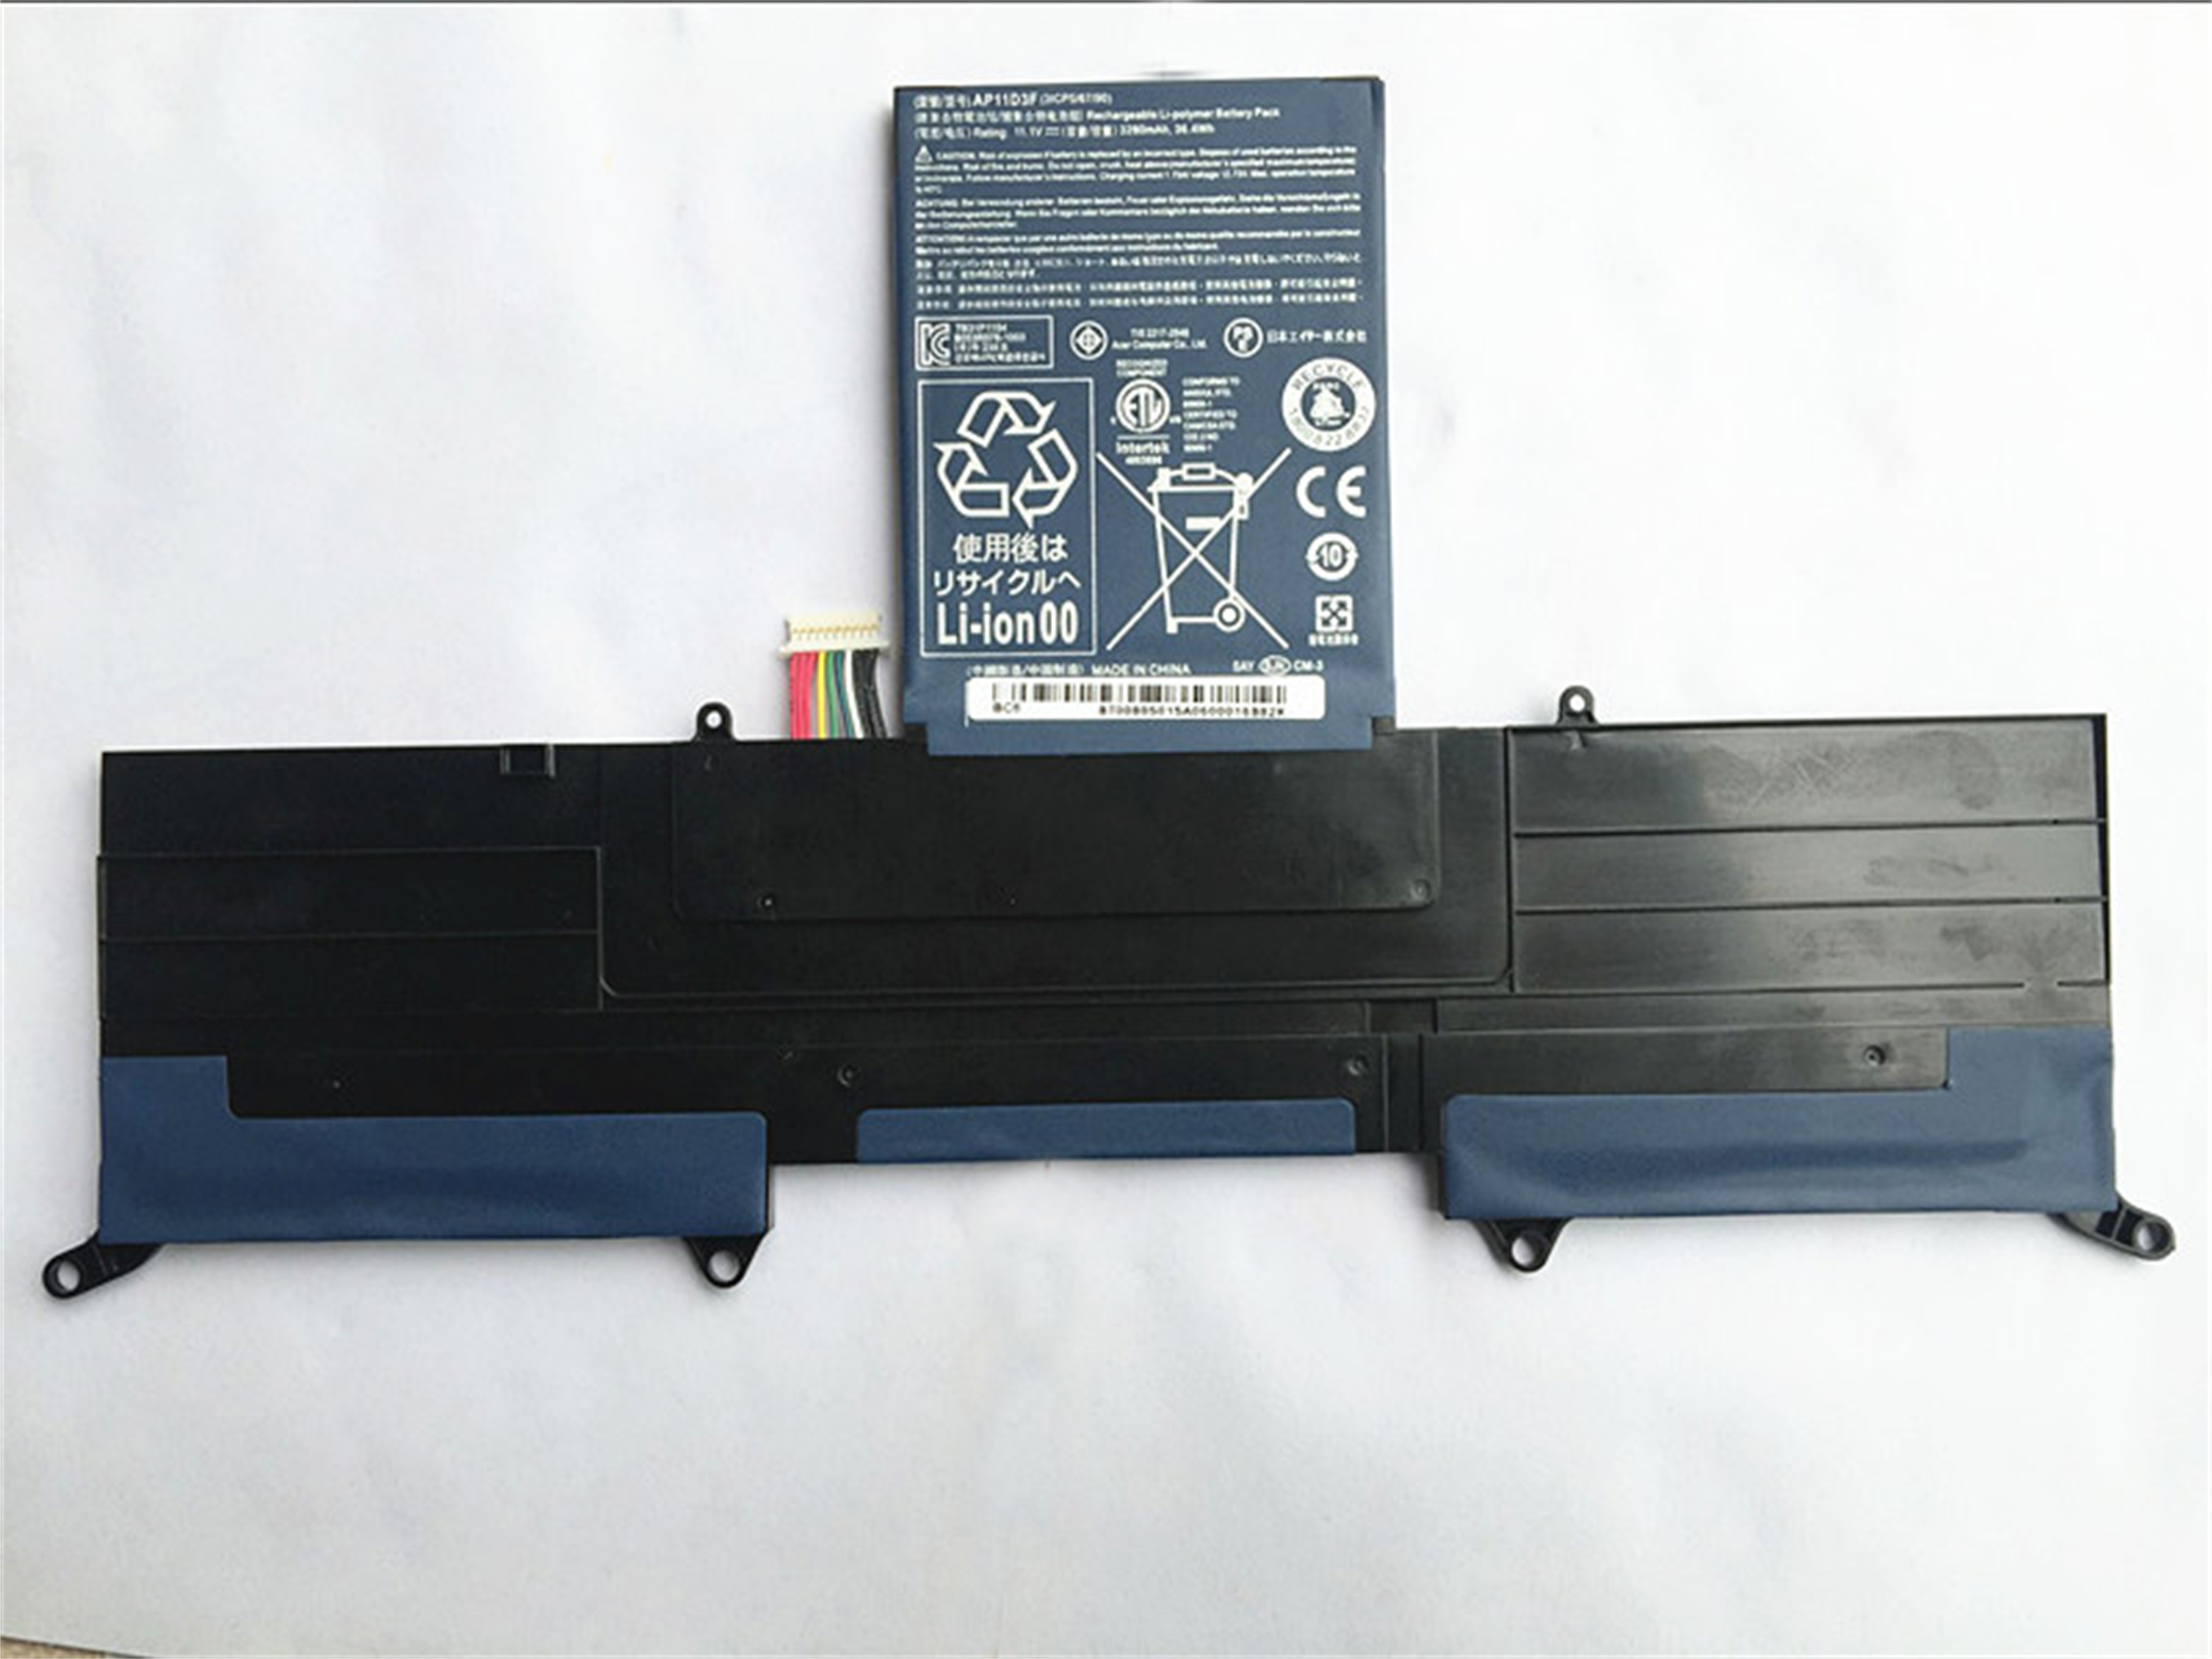 Best Seller OEM Manufacturer laptop battery lithium ion batteries AP11D3F for Acer Acer Aspire S3 Series S3 ASS3 MS2346S3-391-6407